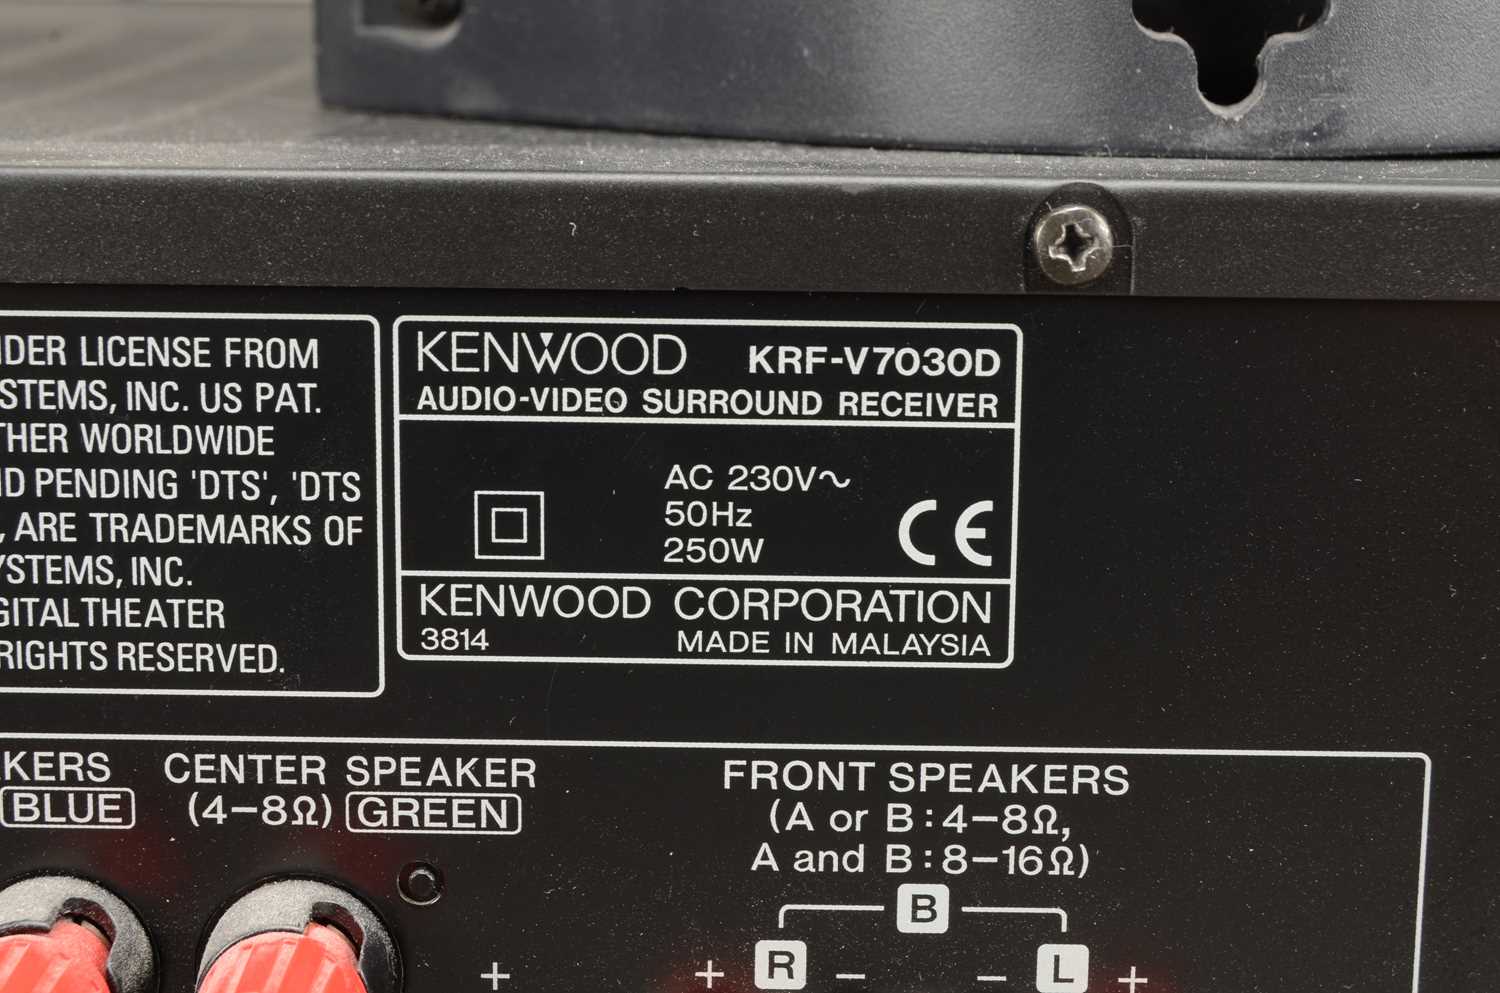 Kenwood Audio Video Receiver / Bose and Sony Speakers, - Image 5 of 7